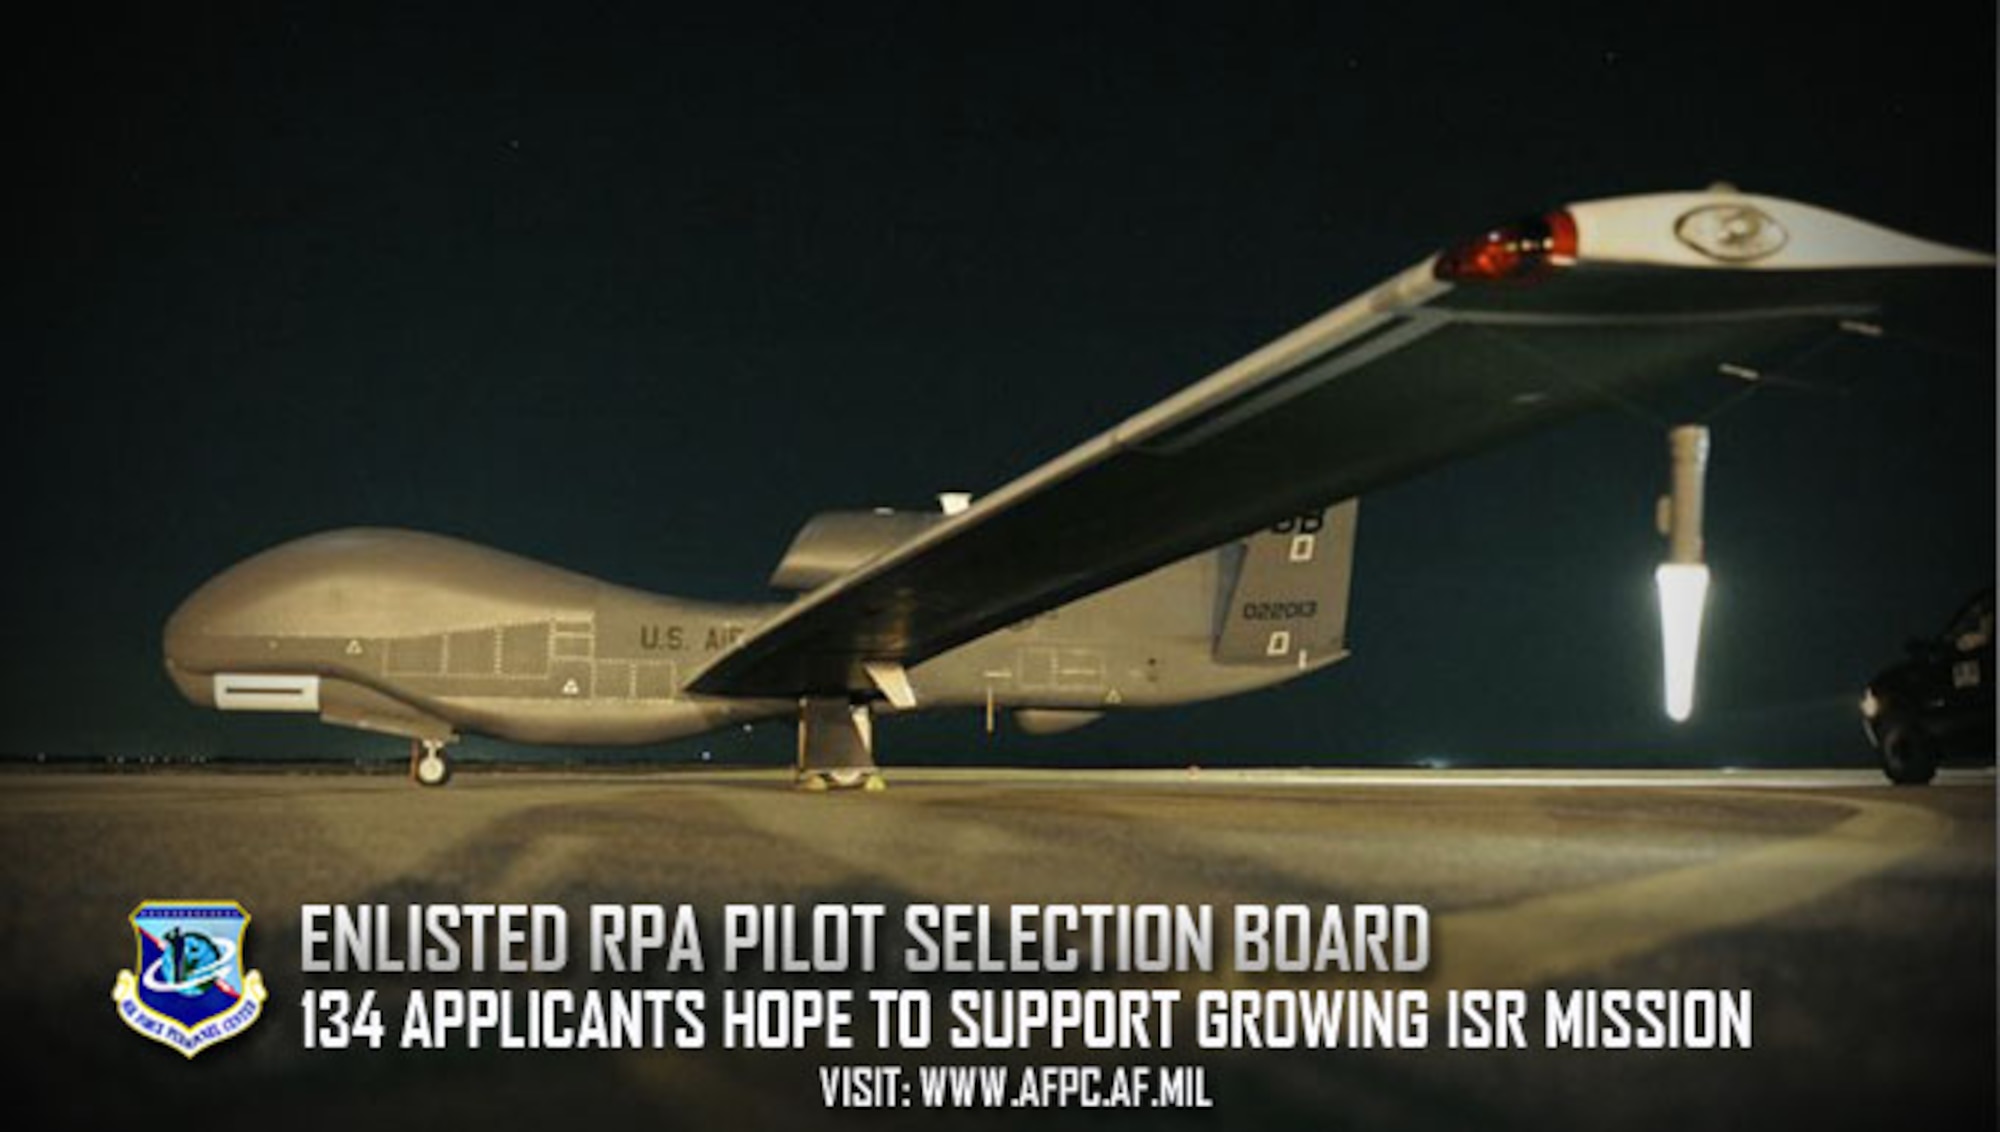 Second annual Enlisted RPA Pilot Selection Board convenes at AFPC